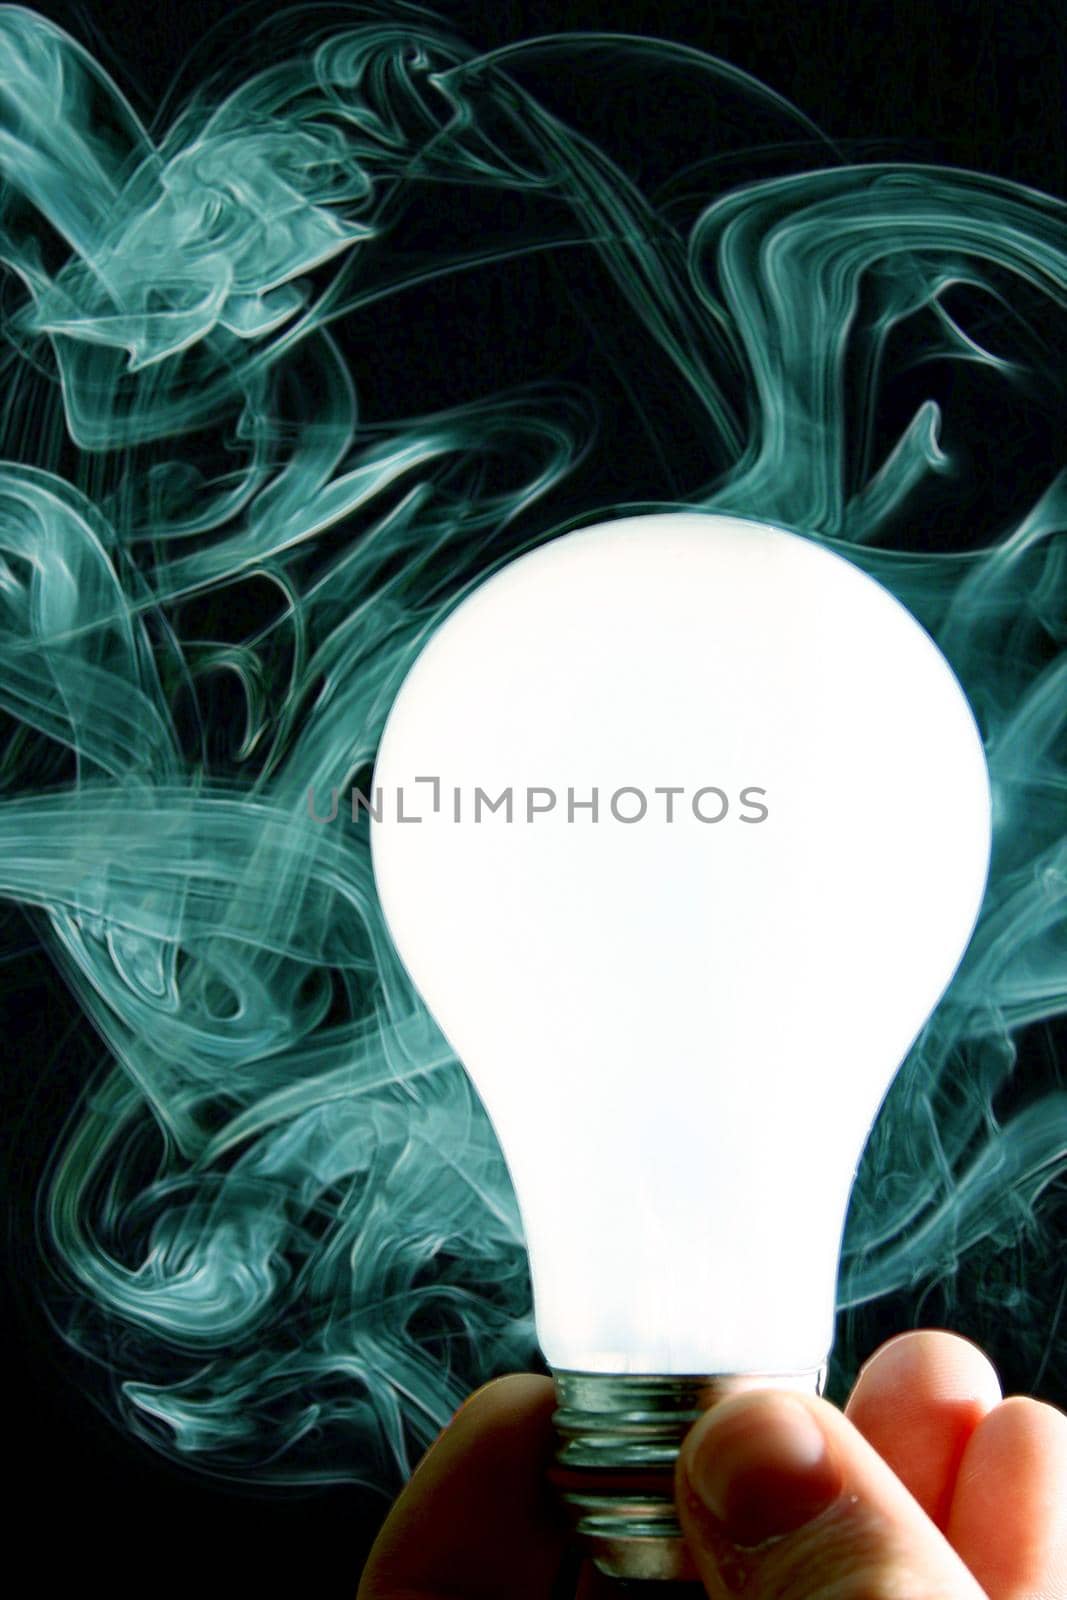 Image of White lightbulb held by a human hand against a background of teal smoke and black